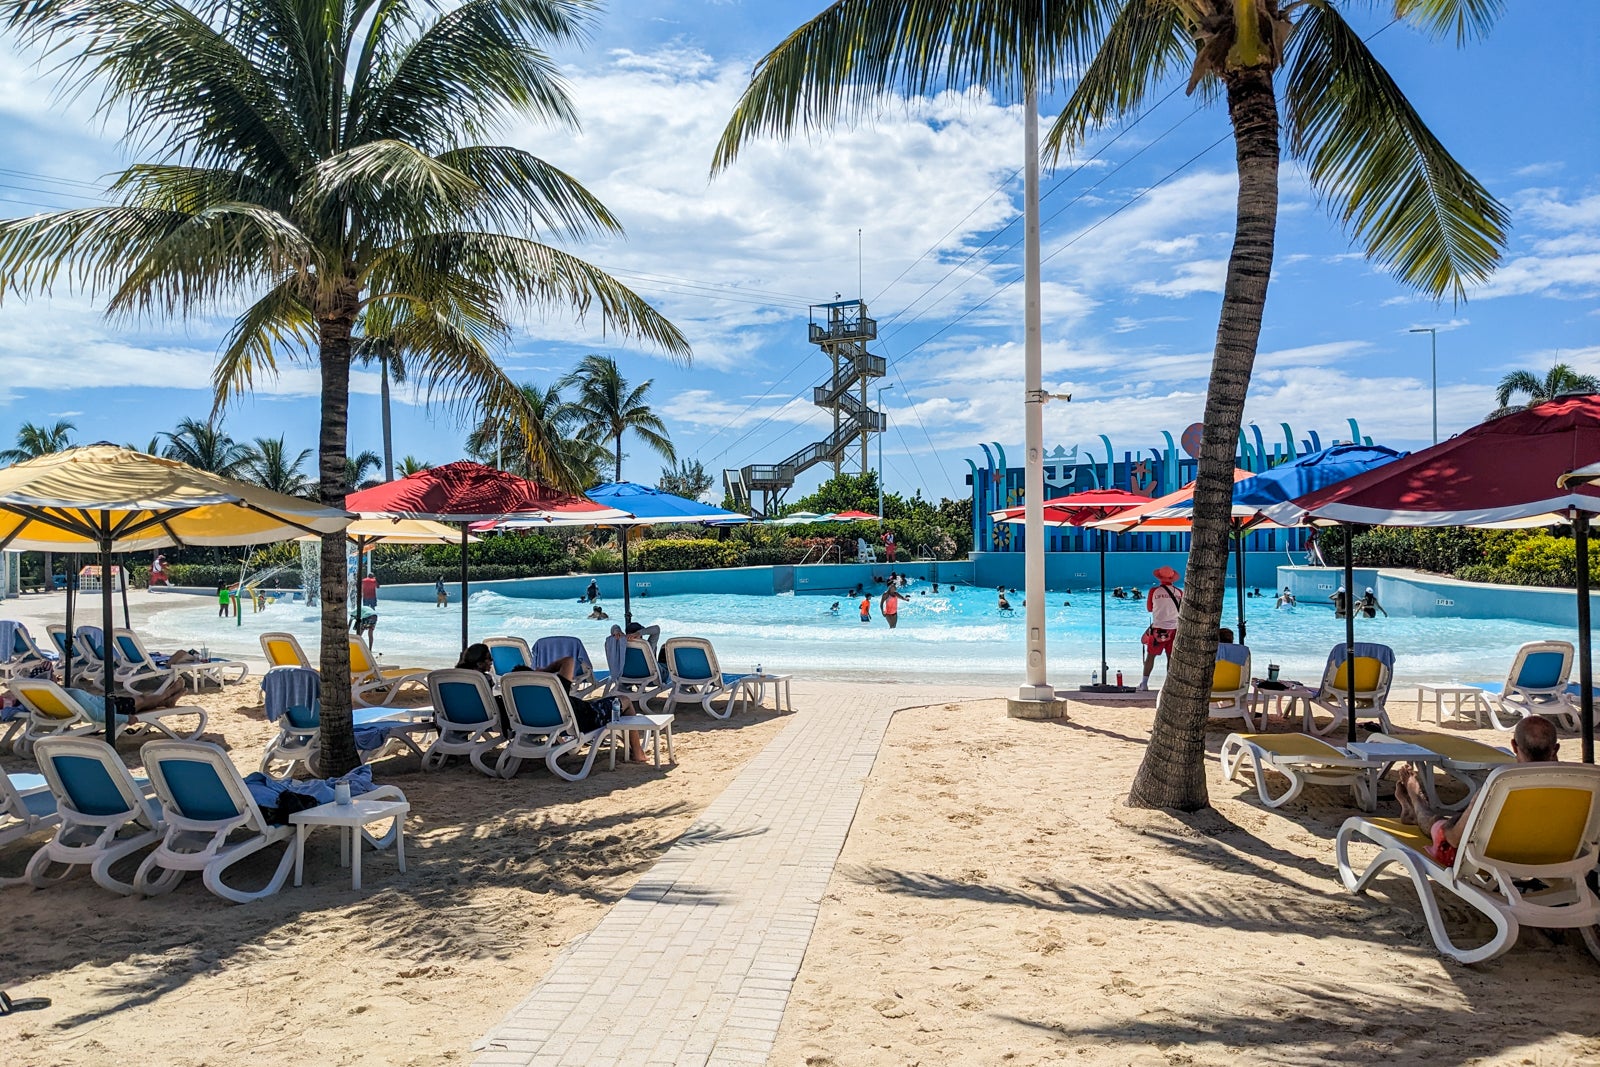 Beach with palm trees in front of wave pool